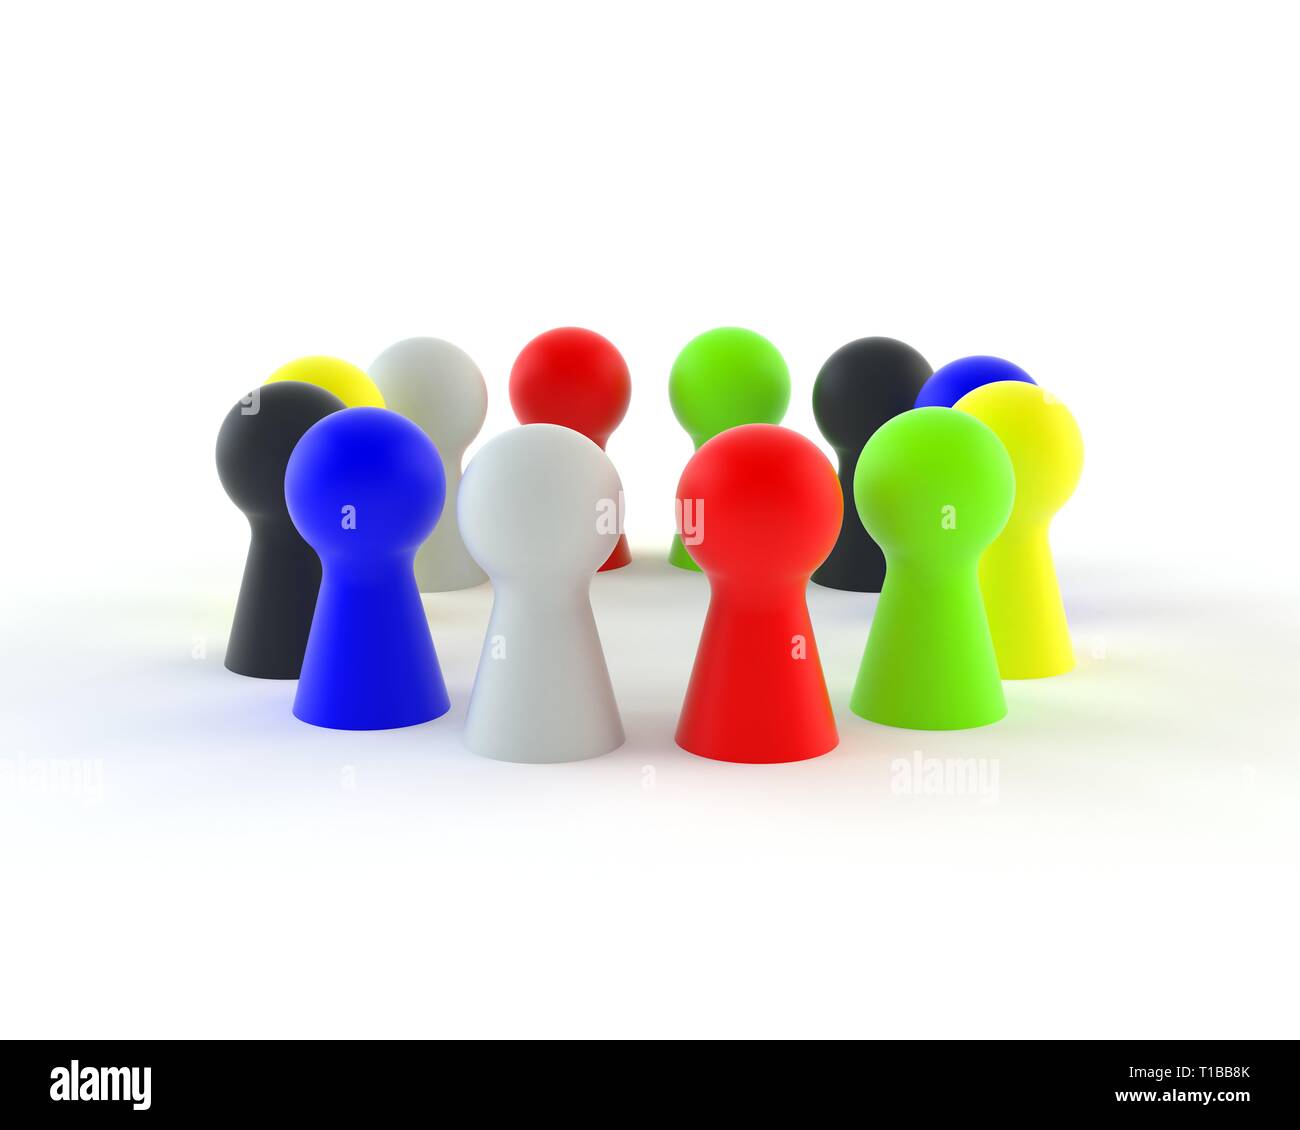 Figures in different colors in circle Stock Photo